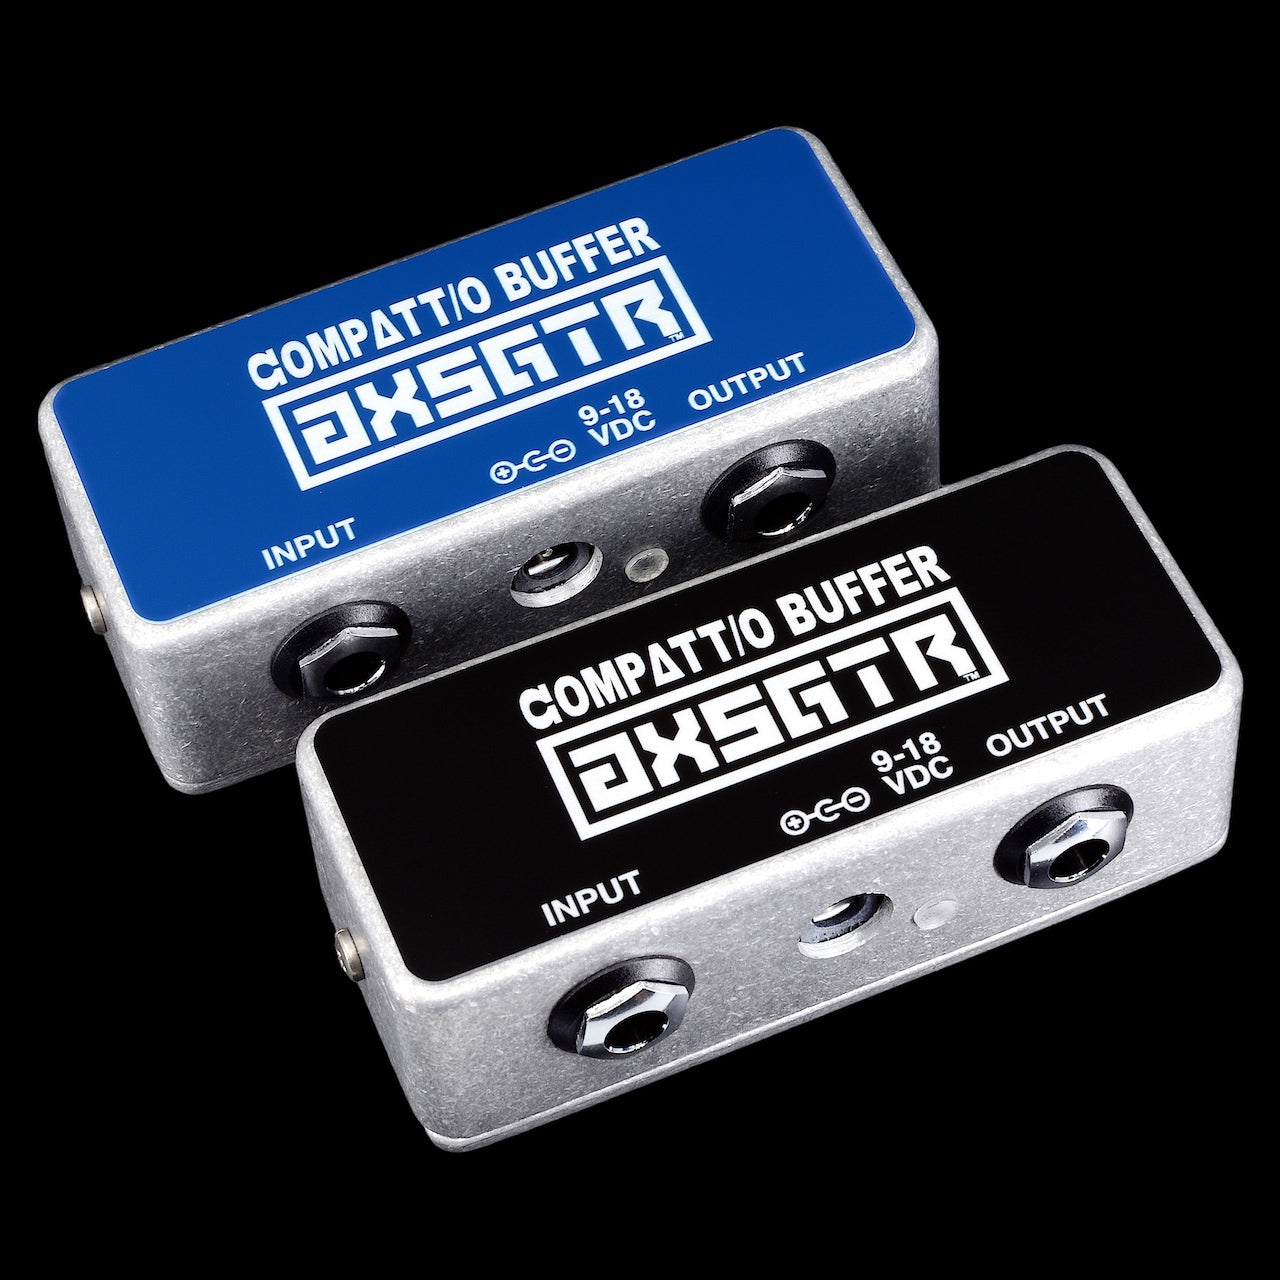 axsgtr axess electronics cpto compatto guitar input output buffer line driver left side angled both black blue